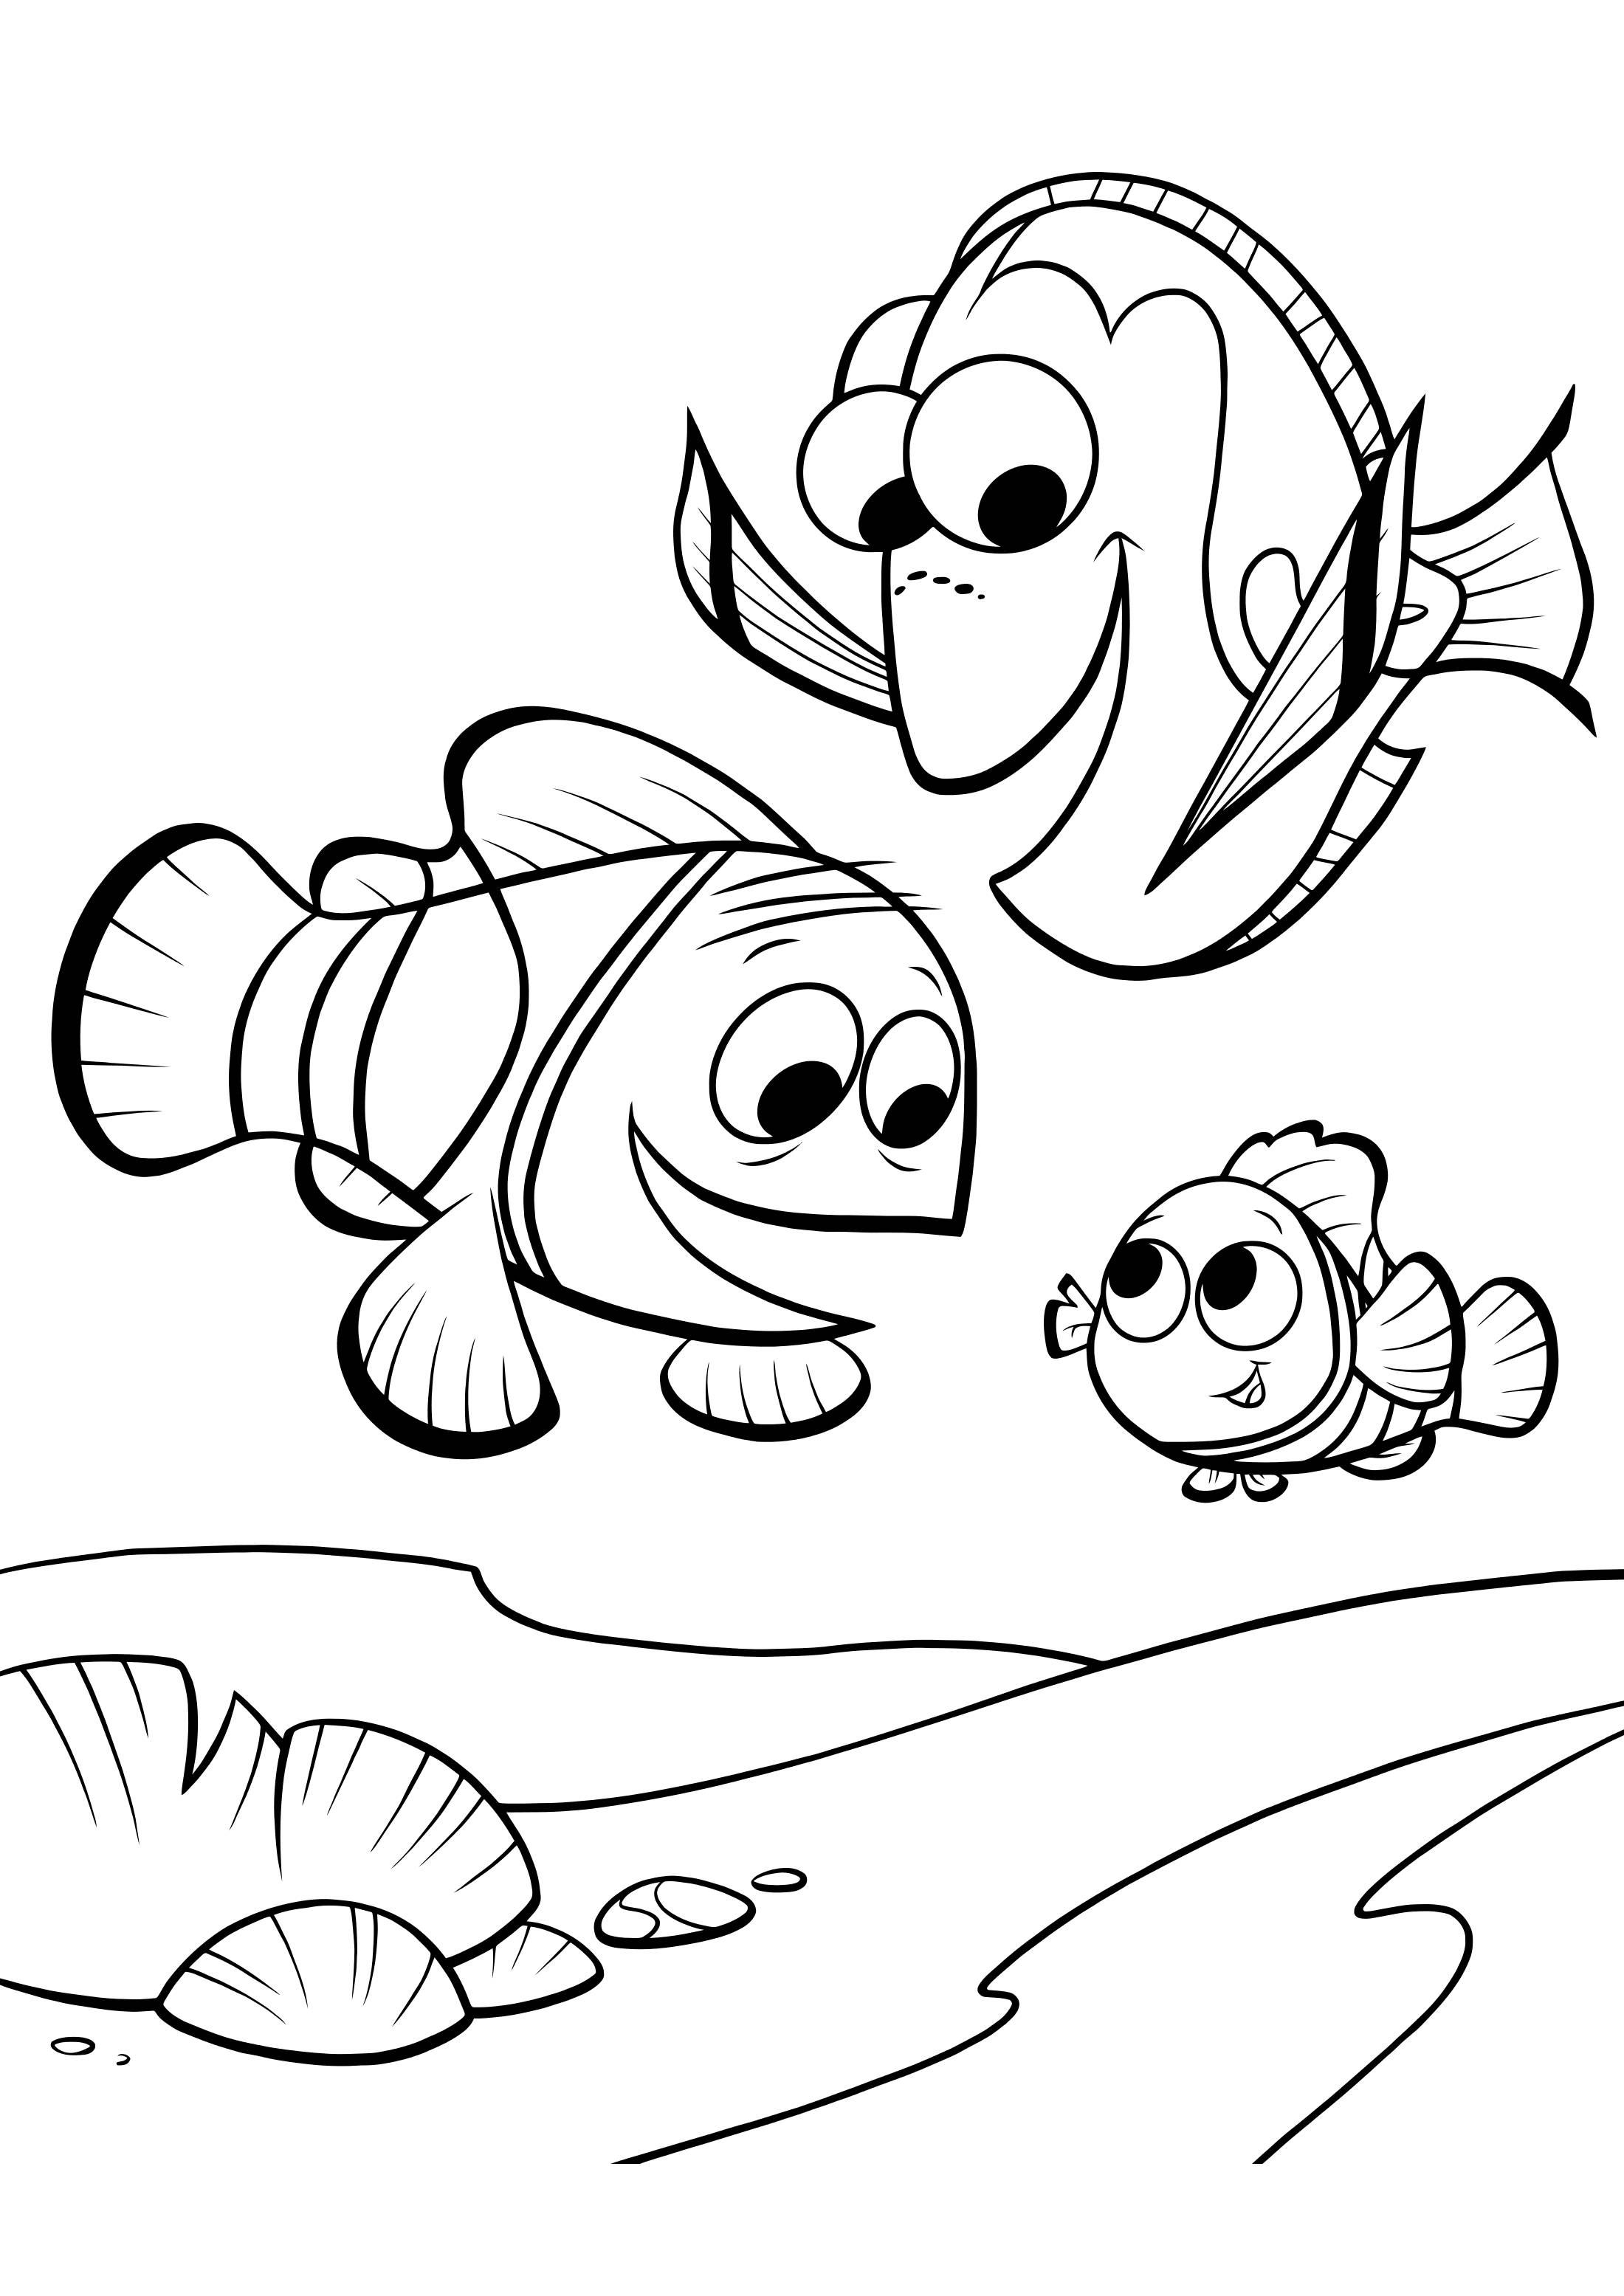 Coloring dory, marlin and nemo